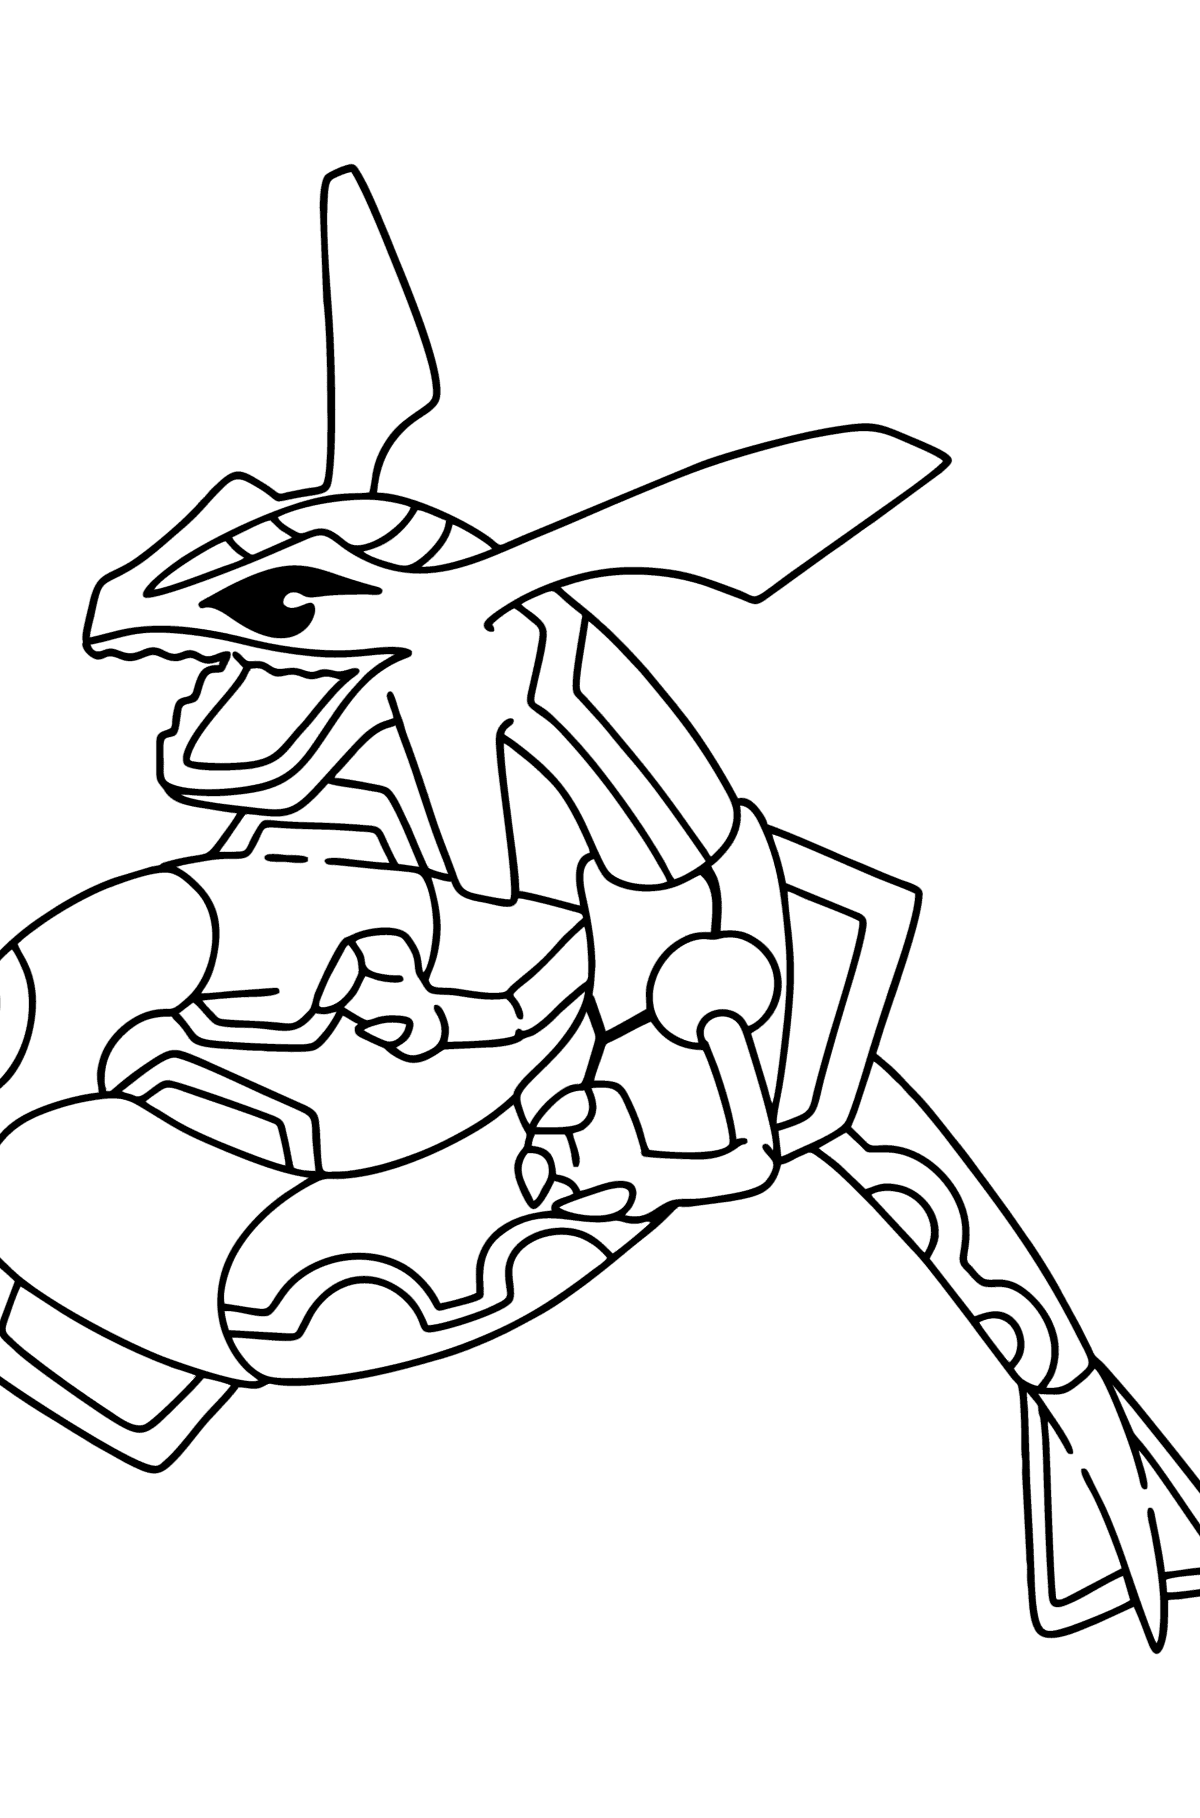 Coloring page Pokemon Go Rayquaza - Coloring Pages for Kids